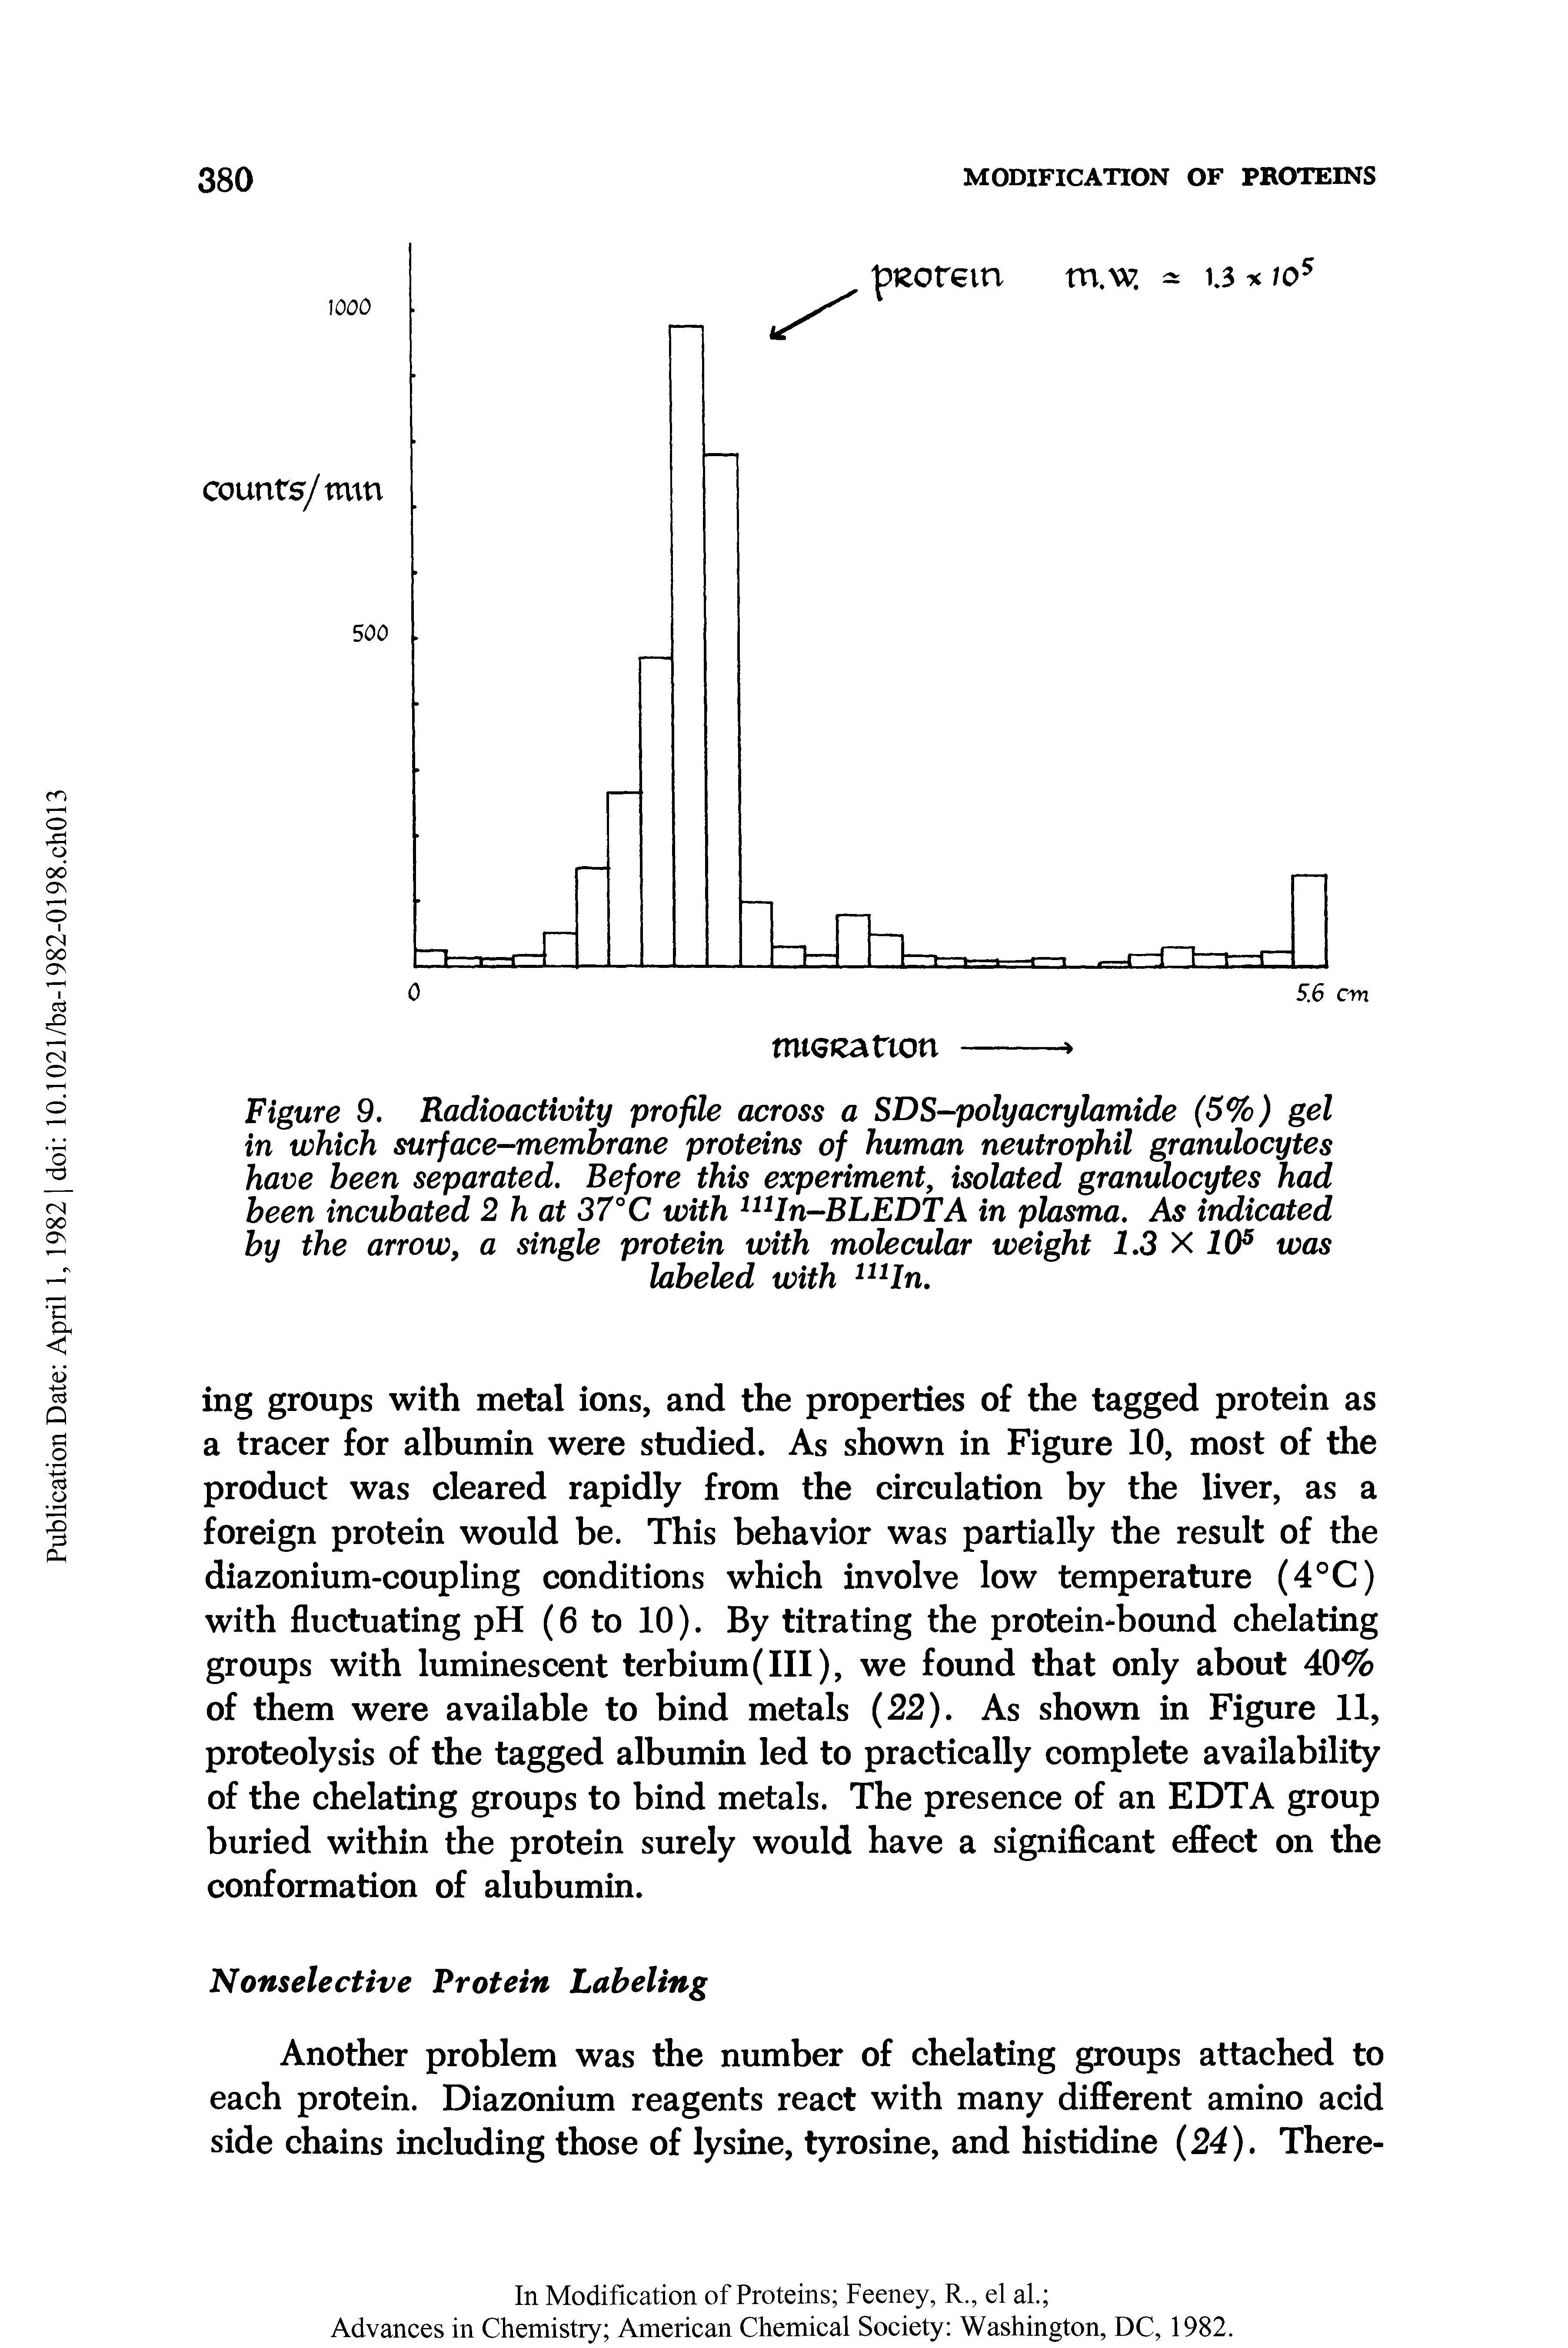 Figure 9. Radioactivity profile across a SDS-polyacrylamide (5%) gel in which surface-membrane proteins of human neutrophil granulocytes have been separated. Before this experiment, isolated granulocytes had been incubated 2 h at 37°C with inIn-BLEDTA in plasma. As indicated by the arrow, a single protein with molecular weight 1.3 X 10s was...